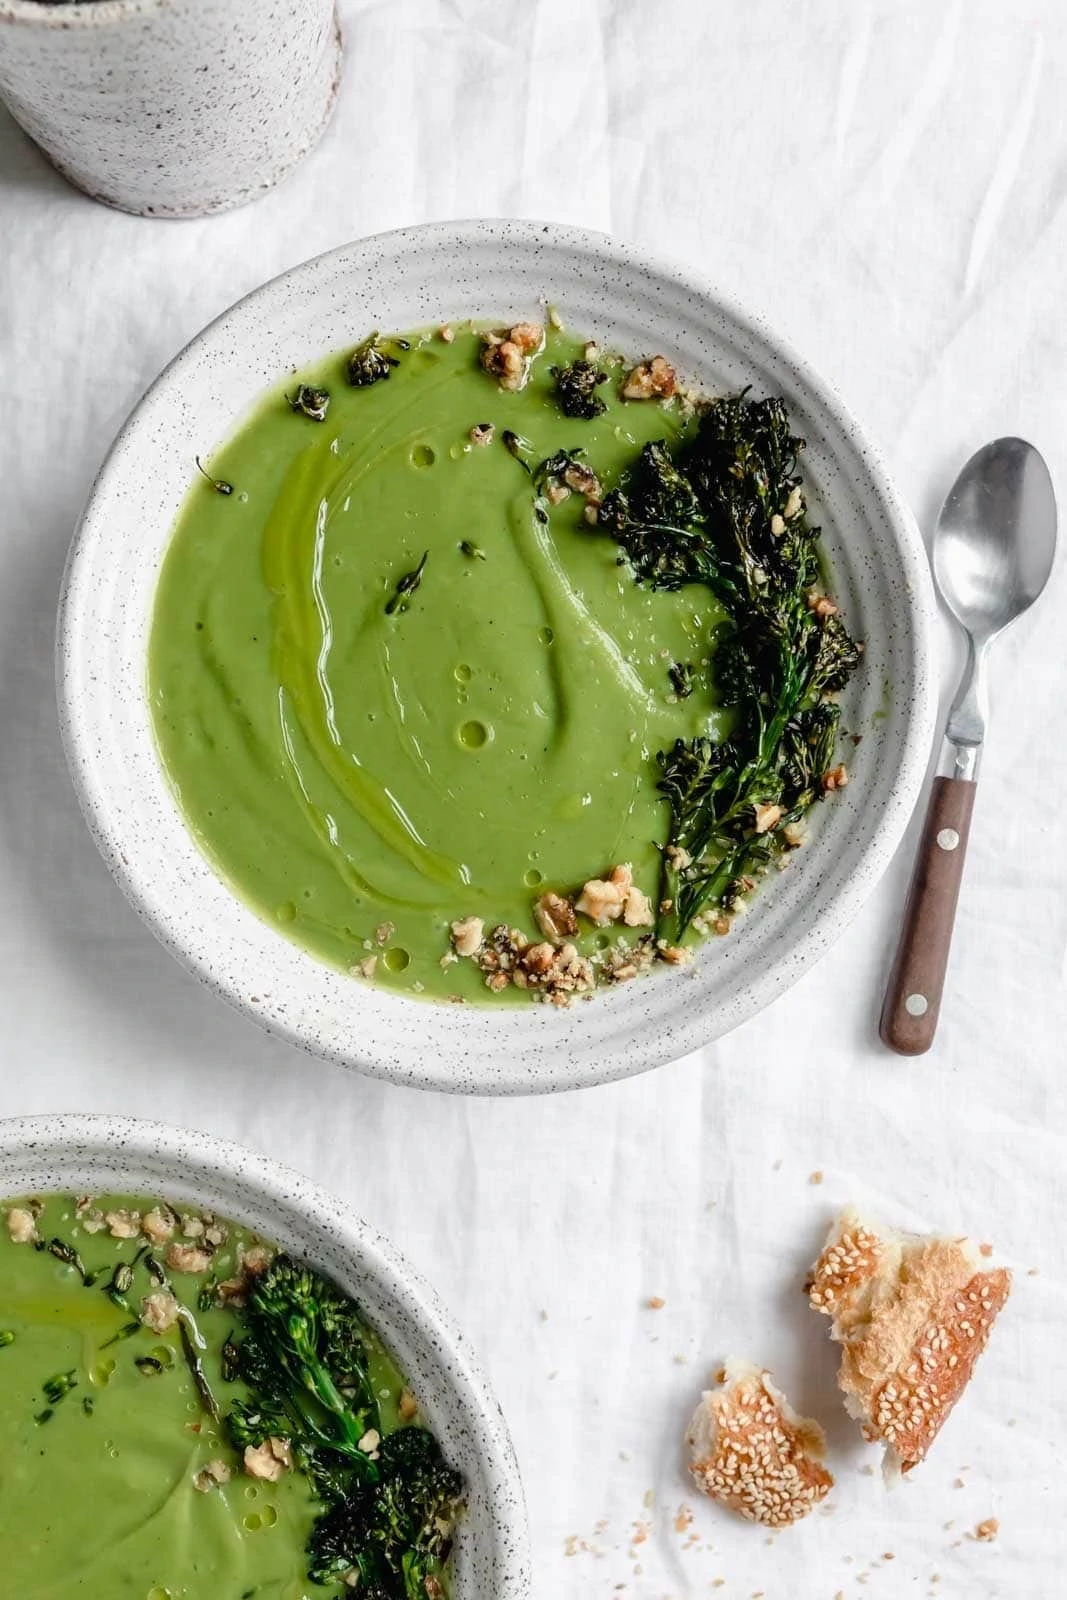 https://bromabakery.com/wp-content/uploads/2019/03/Healthy-1-Ingredient-Broccoli-Soup-1067x1600.webp